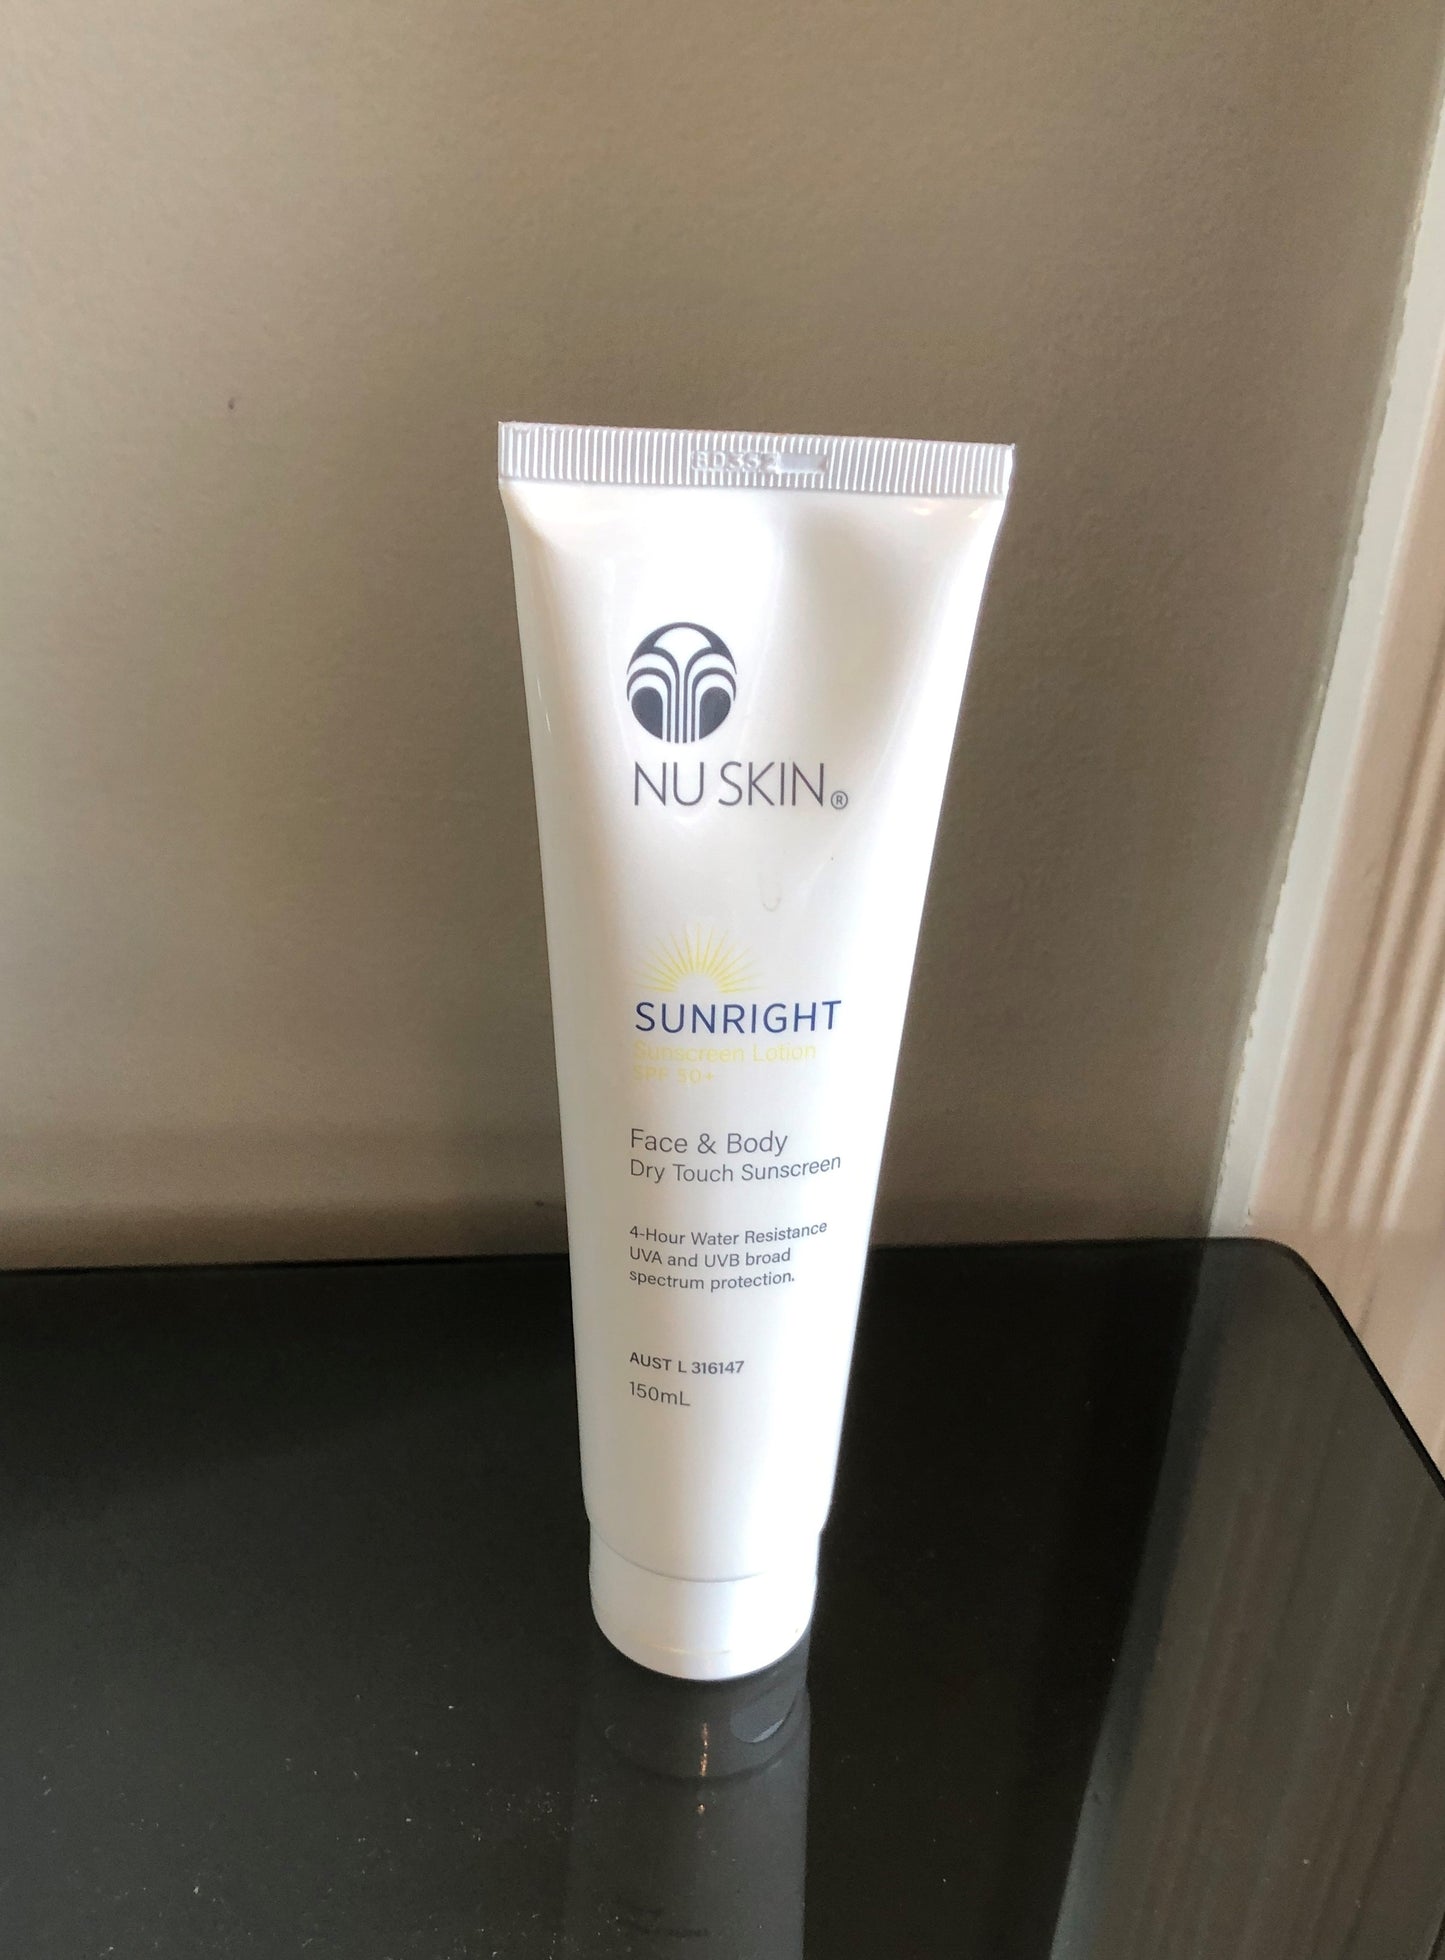 SUNRIGHT SUNSCREEN LOTION 50+ FACE & BODY DRY TOUCH SUNSCREEN